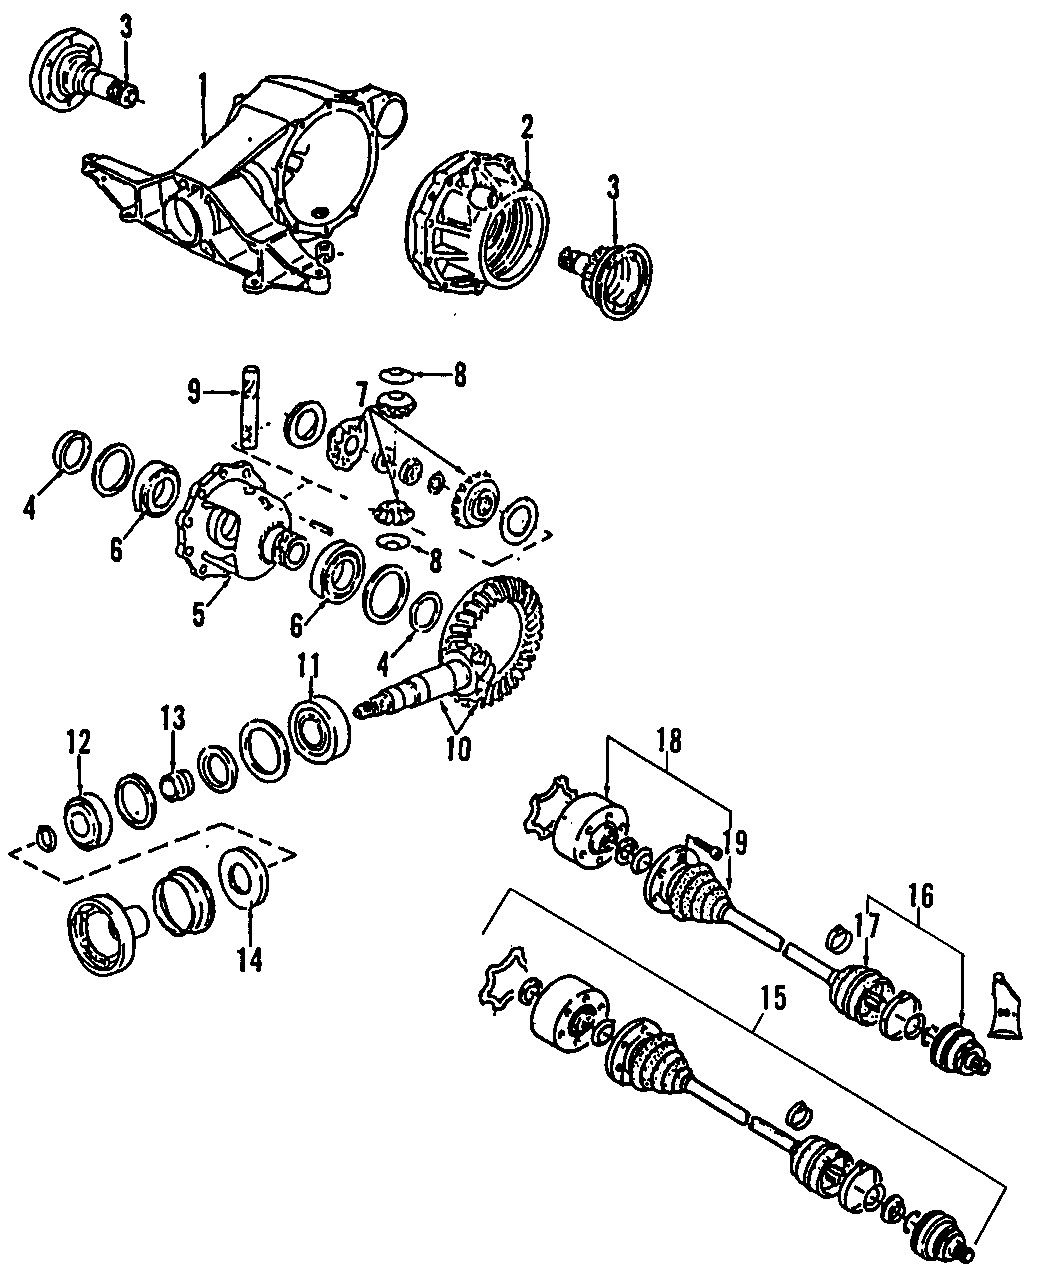 2DRIVE AXLES. REAR AXLE. AXLE SHAFTS & JOINTS. DIFFERENTIAL. PROPELLER SHAFT.https://images.simplepart.com/images/parts/motor/fullsize/F205080.png